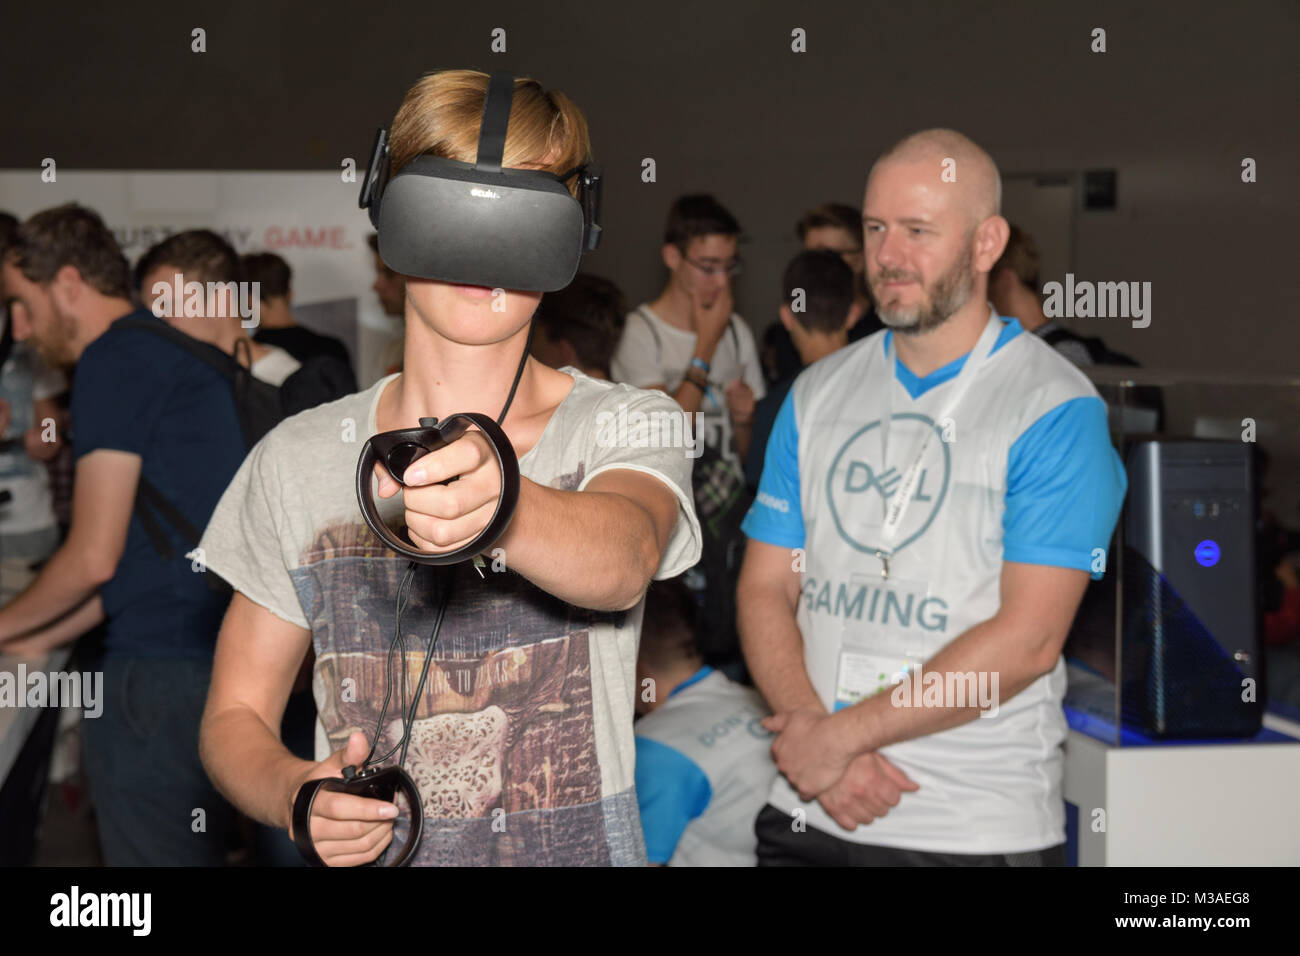 Cologne, Germany - August 24, 2017: A visitor is playing a virtual reality game with oculus rift + touch at the boot of Dell Gaming at Gamescom 2017.  Stock Photo